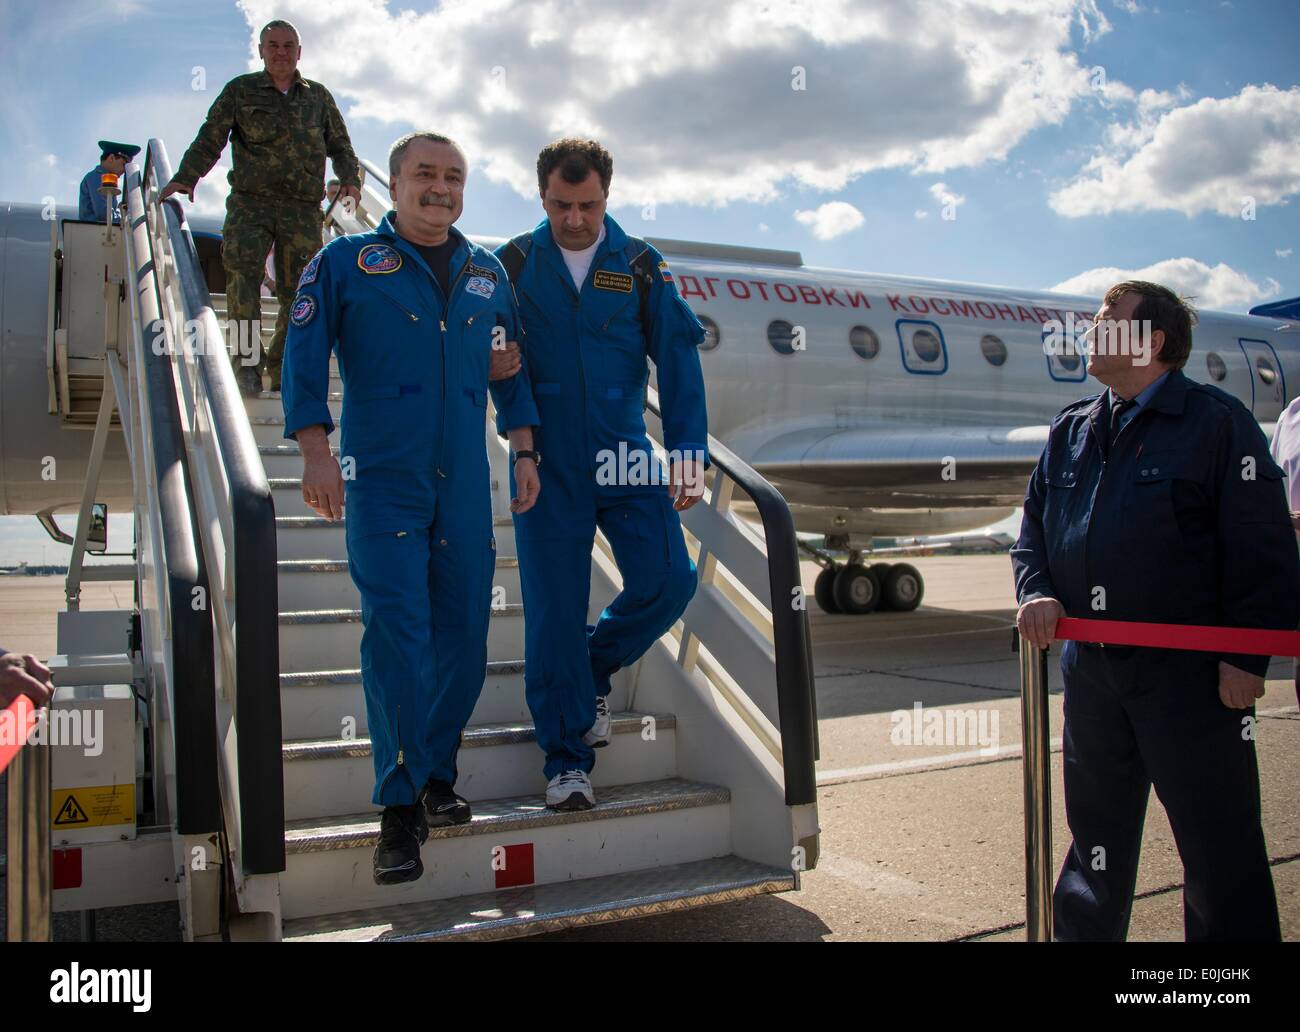 ISS Expedition 39 Flight Engineer Mikhail Tyurin of the Russian Federal Space Agency is welcomed home upon his return at Chkalovsky Airport a few hours after landing in the Soyuz TMA-11M spacecraft in Kazakhstan May 14, 2014 in Moscow, Russia. Wakata, Tyurin and Mastracchio returned to Earth after more than six months onboard the International Space Station where they served as members of the Expedition 38 and 39 crews. Stock Photo